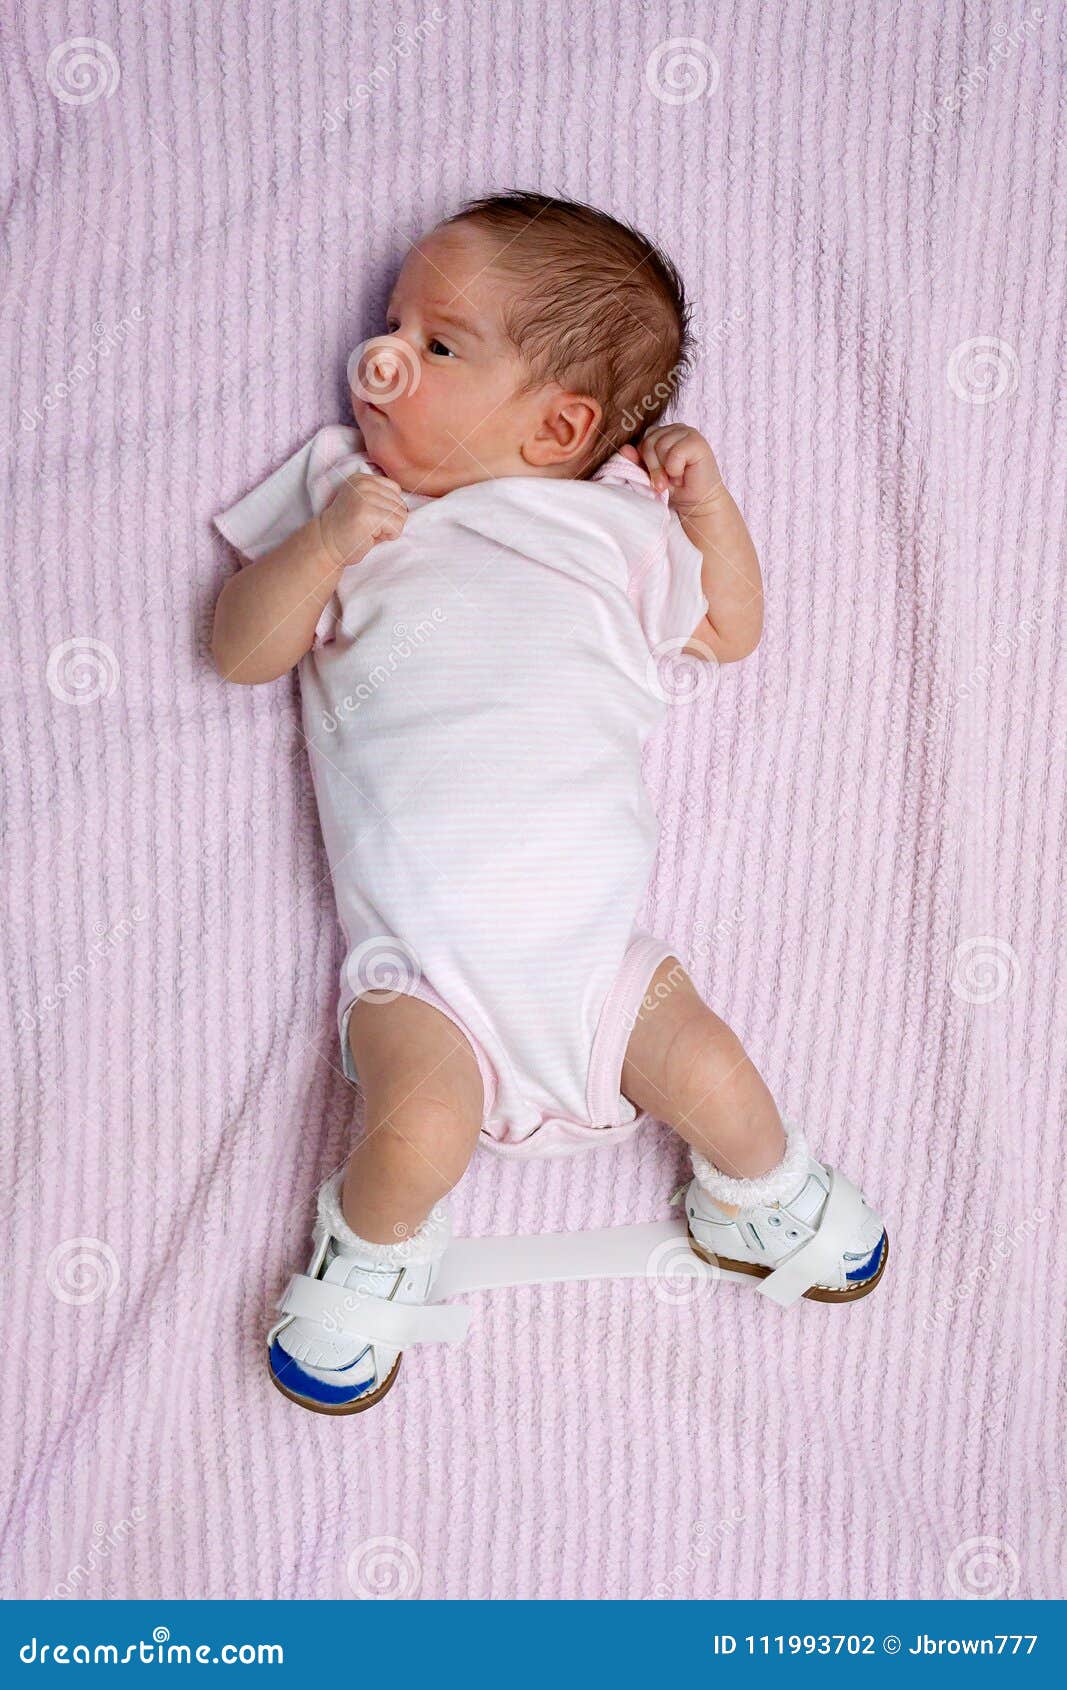 Newborn With Club Foot Wearing Orthopedic Shoes Stock Photo Image Of Congenital Footwear